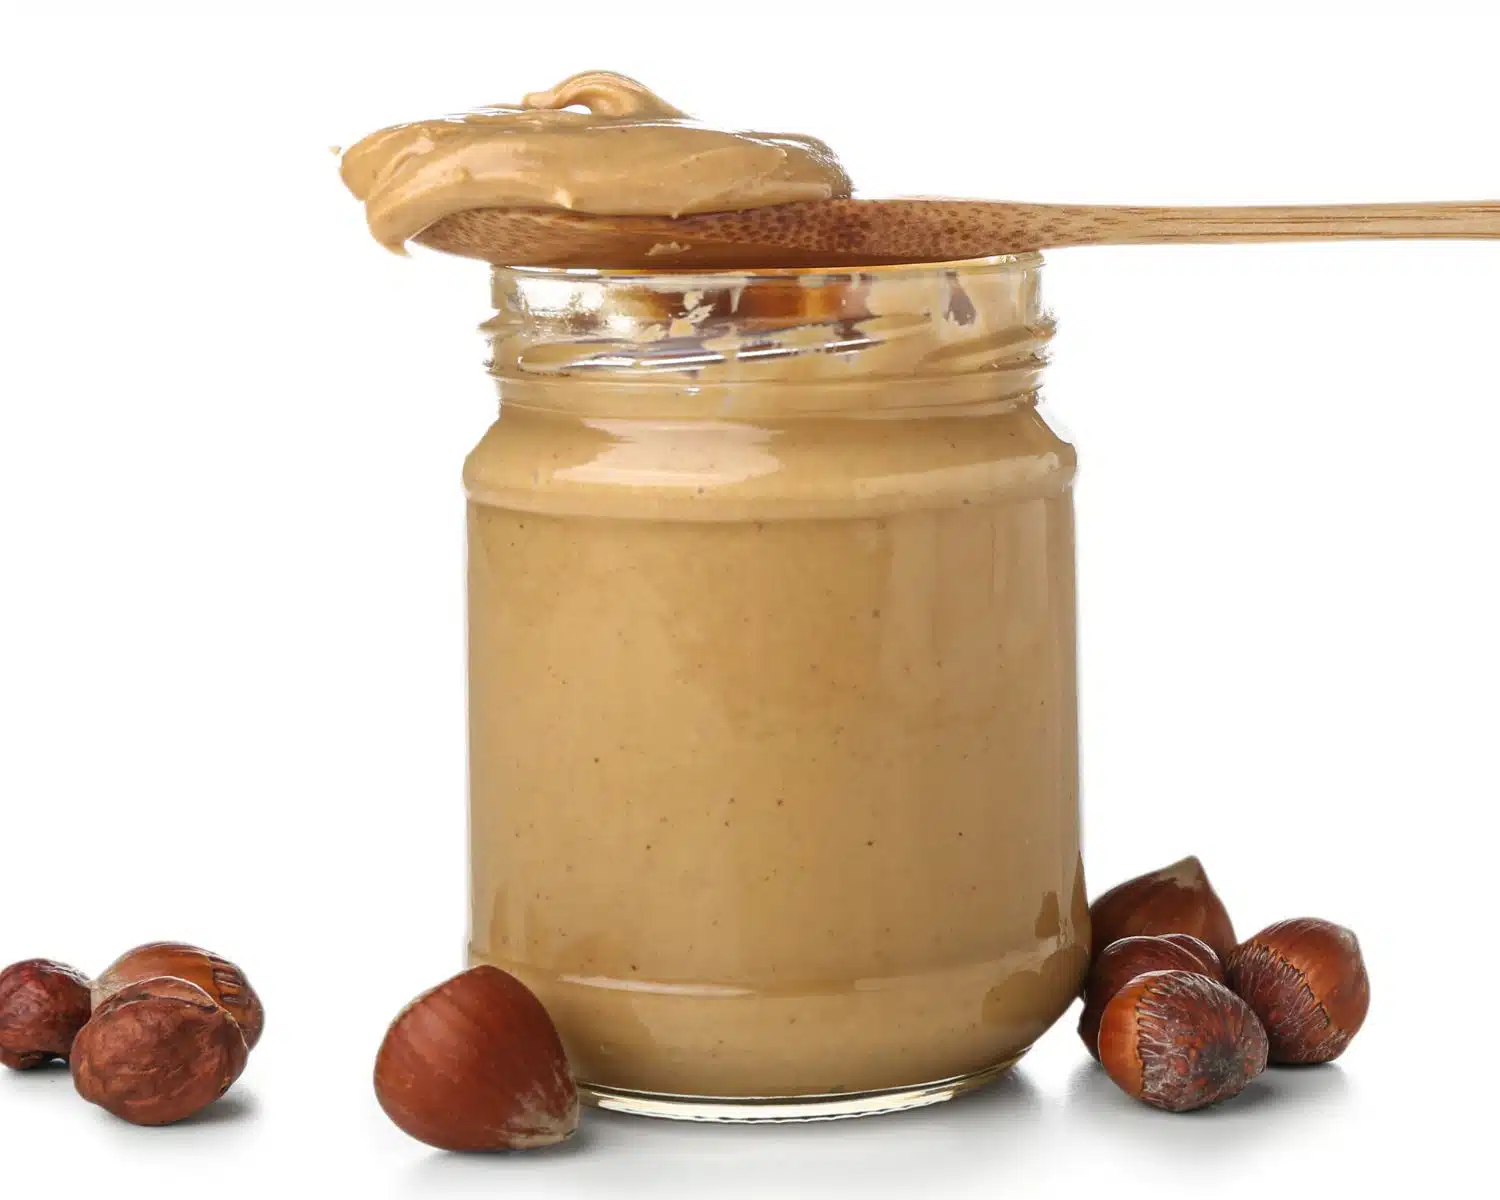 A spoon with nut butter sits on top of a jar of the same nut butter. There are hazelnuts around the jar.